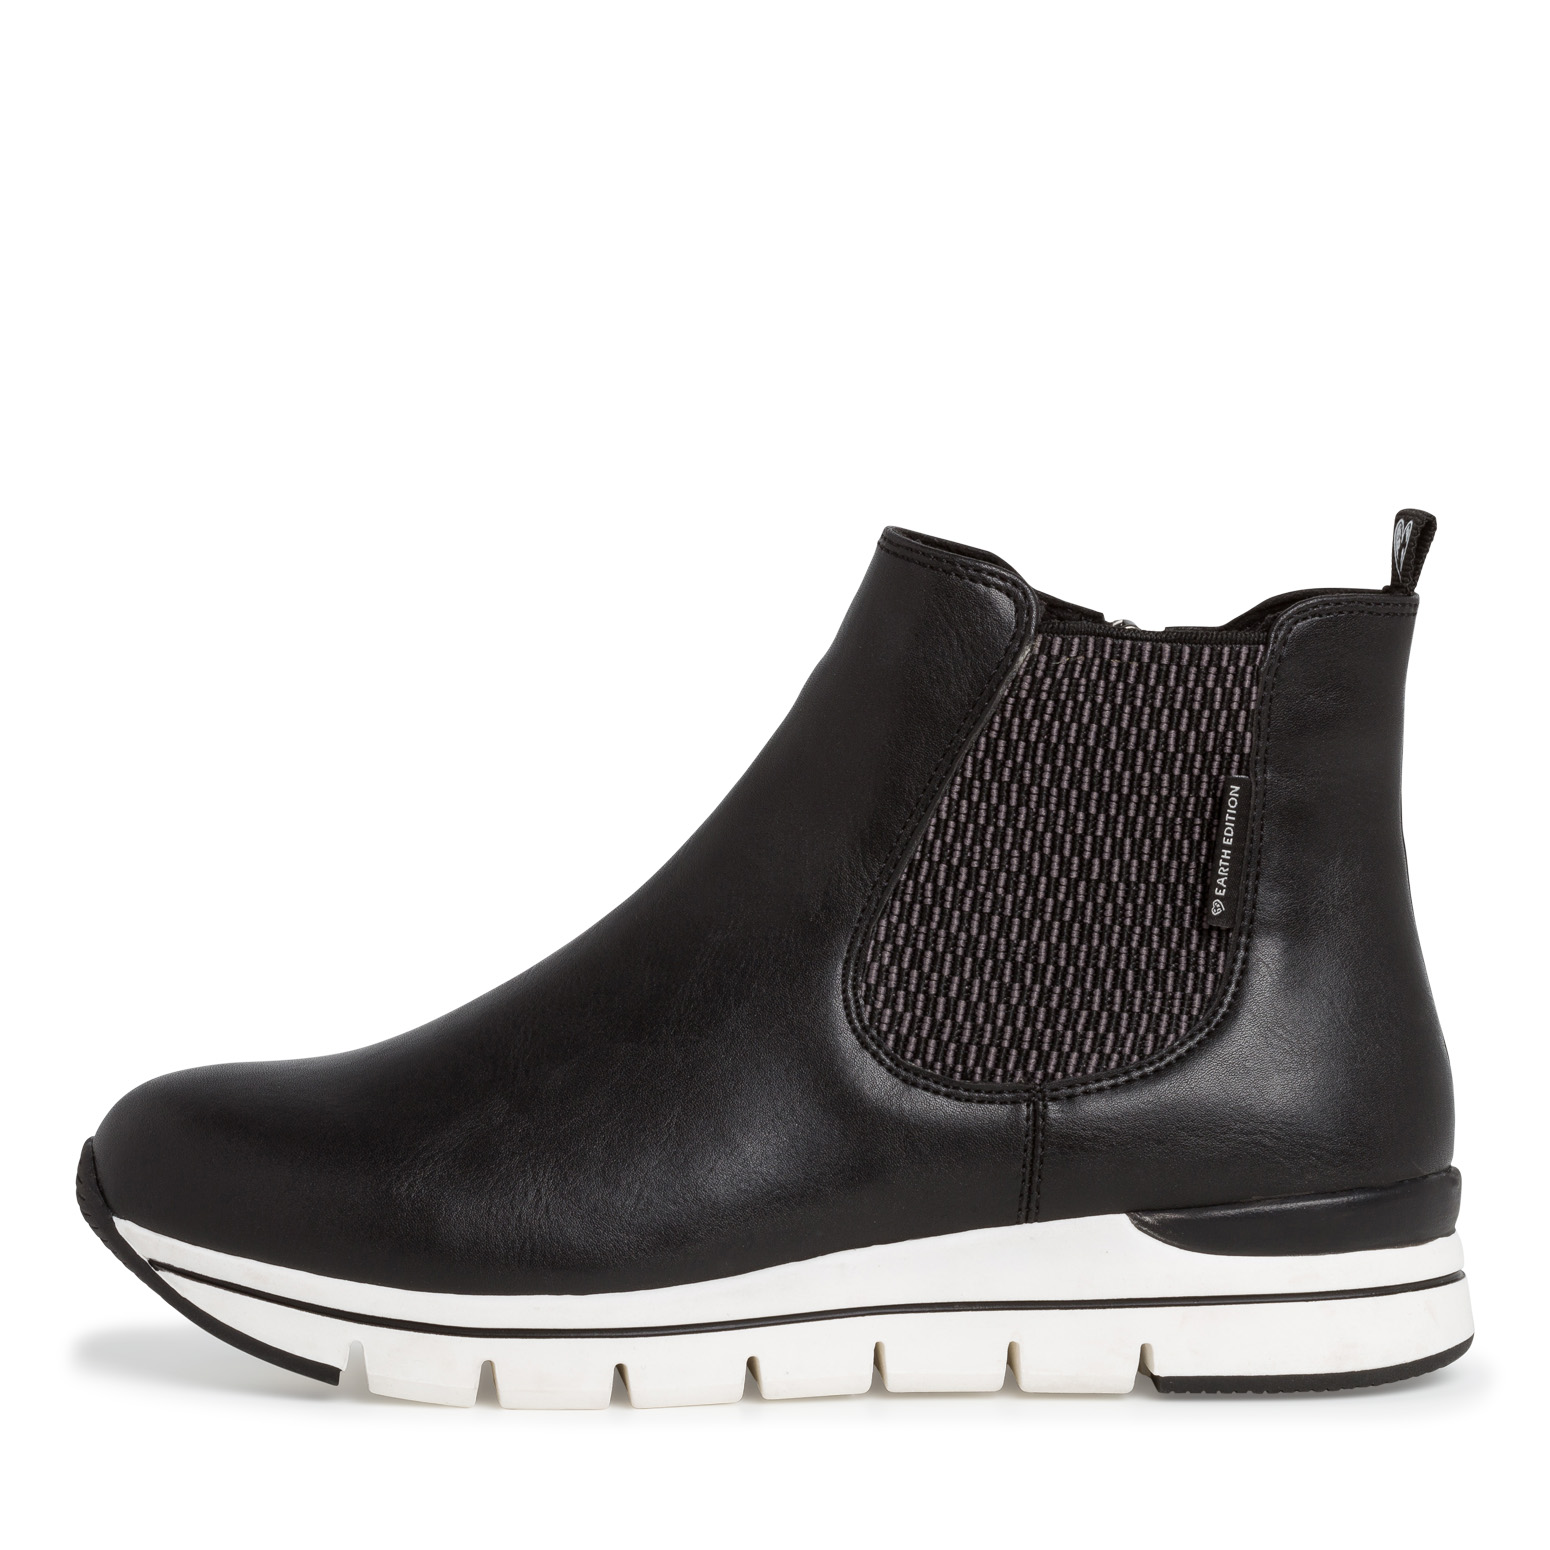 Buy Chelsea boots from Marco Tozzi 